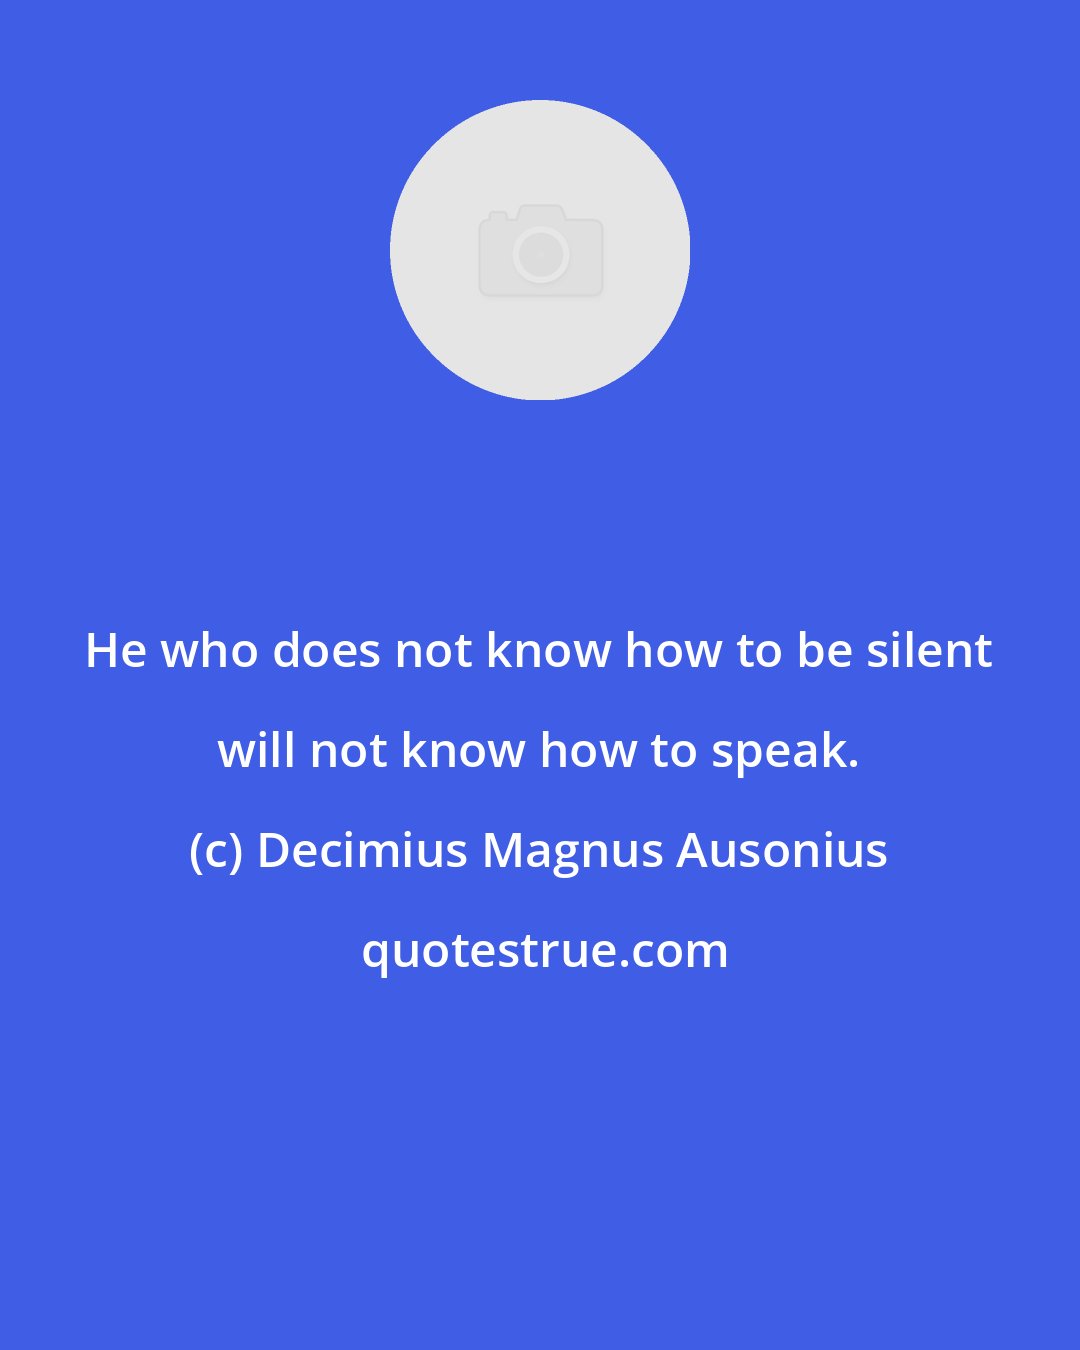 Decimius Magnus Ausonius: He who does not know how to be silent will not know how to speak.